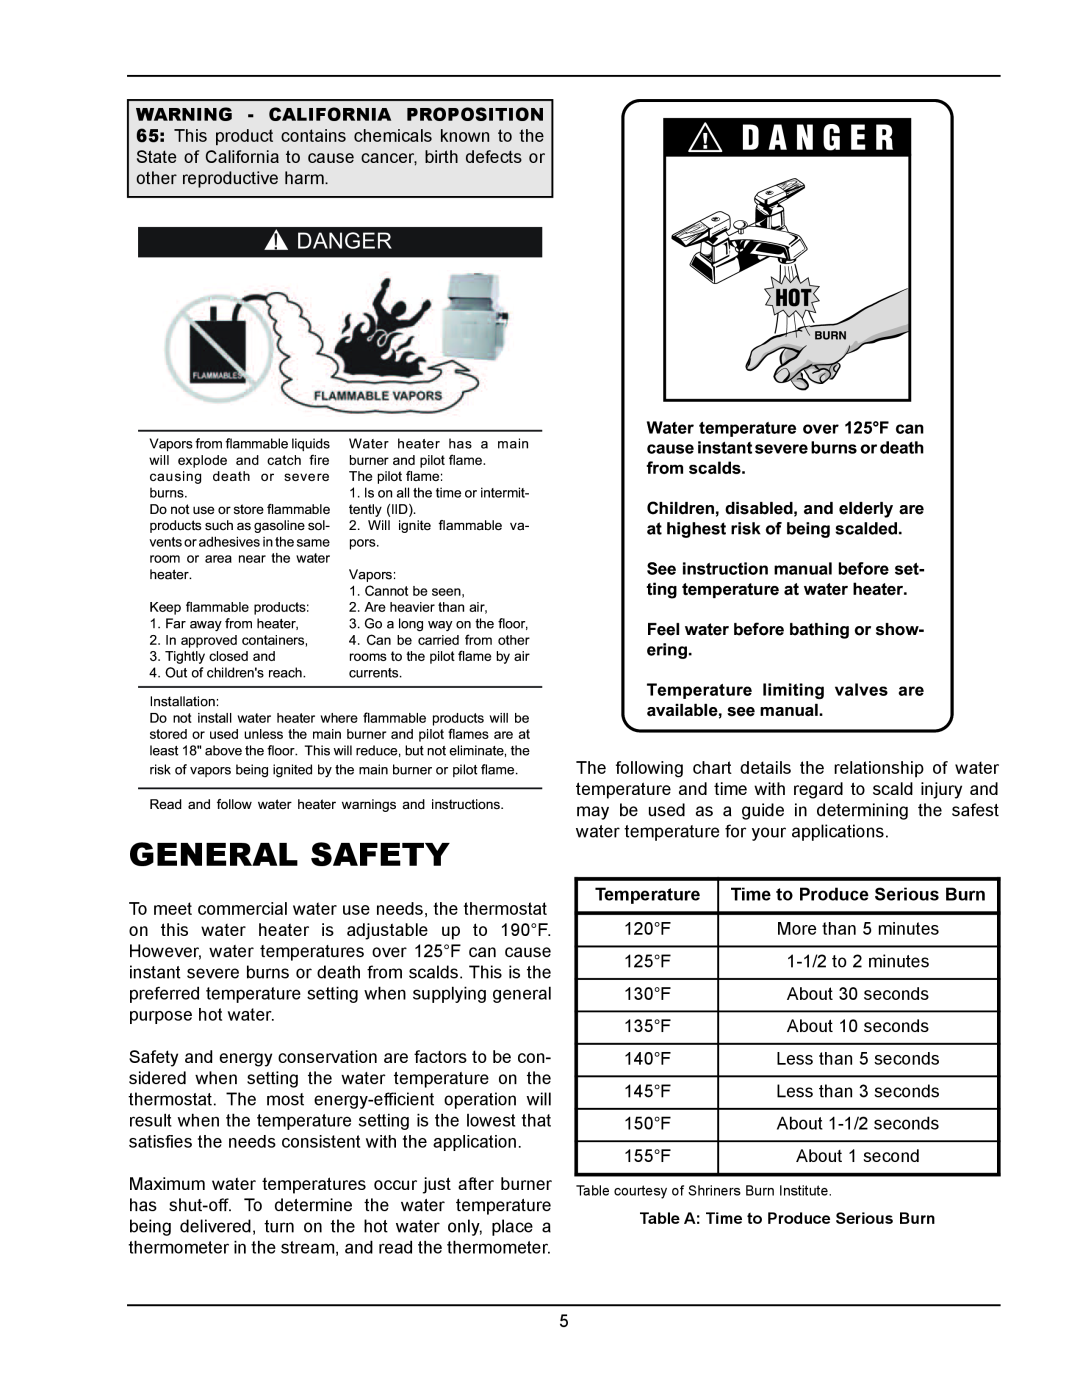 Raypak 1334001 General Safety, Danger, Warning - California Proposition, Feel water before bathing or show- ering 